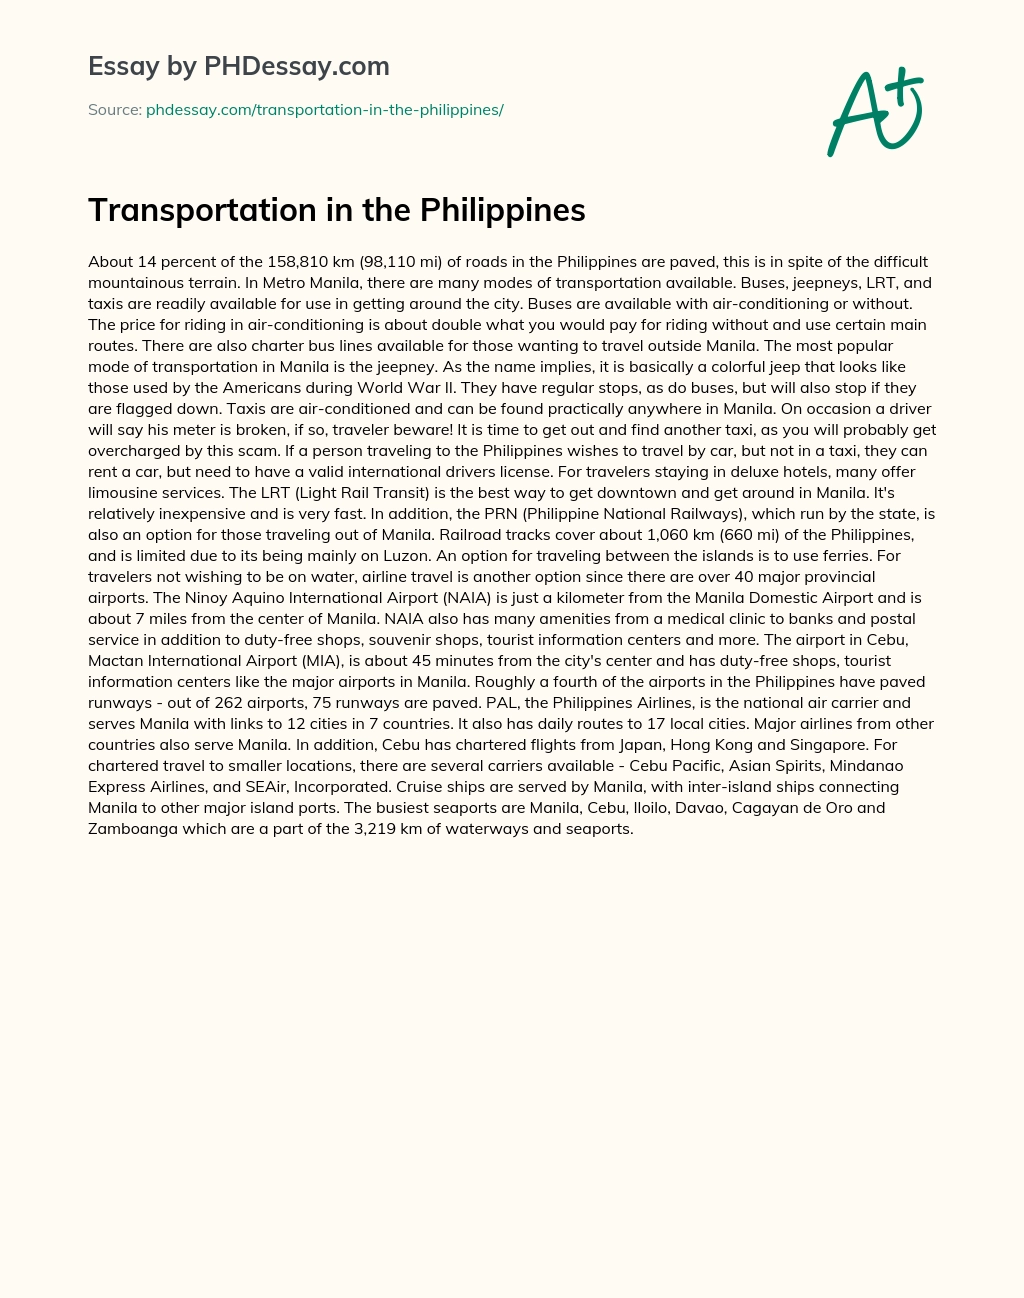 Transportation in the Philippines essay